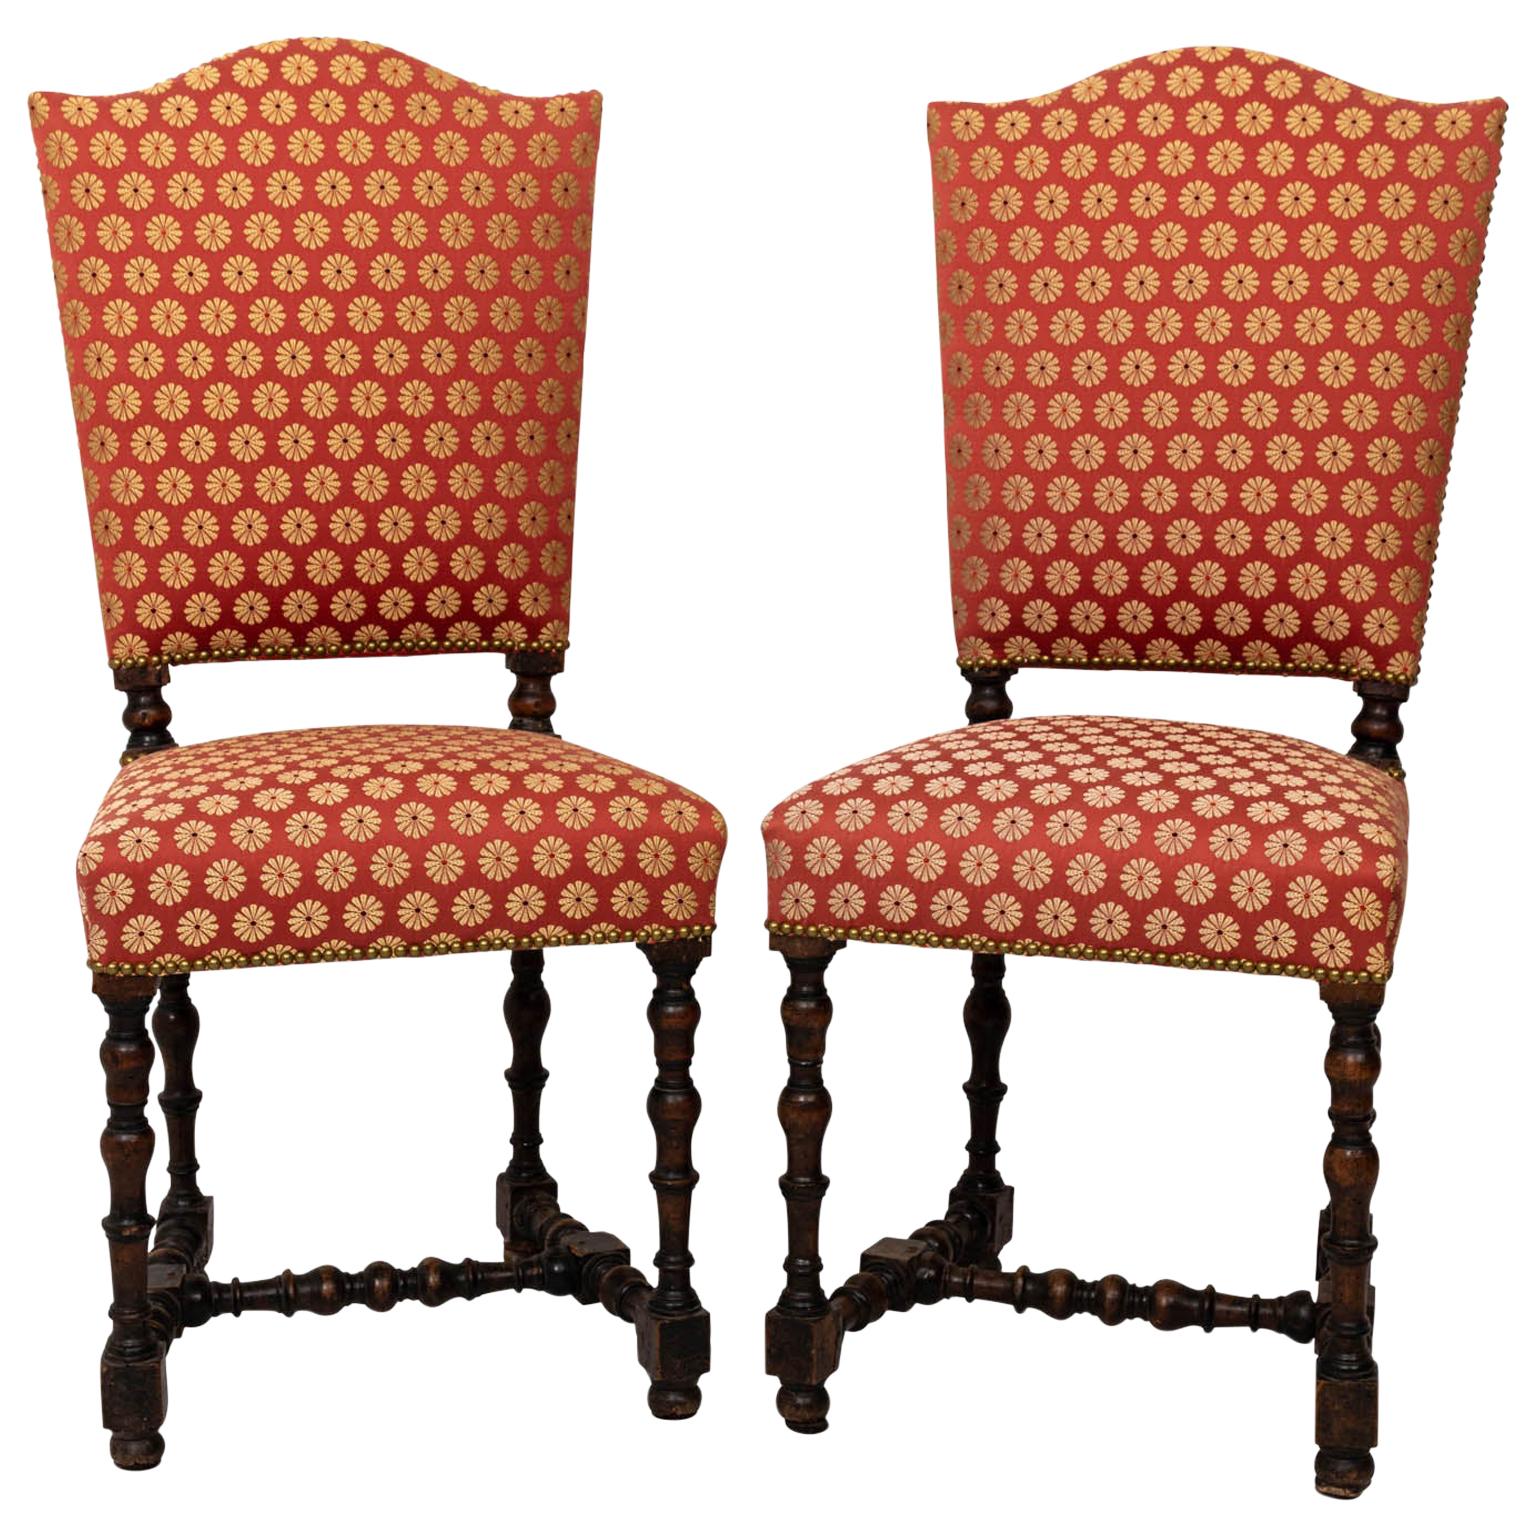 Pair of 18th Century Upholstered Side Chairs with Ebony Base